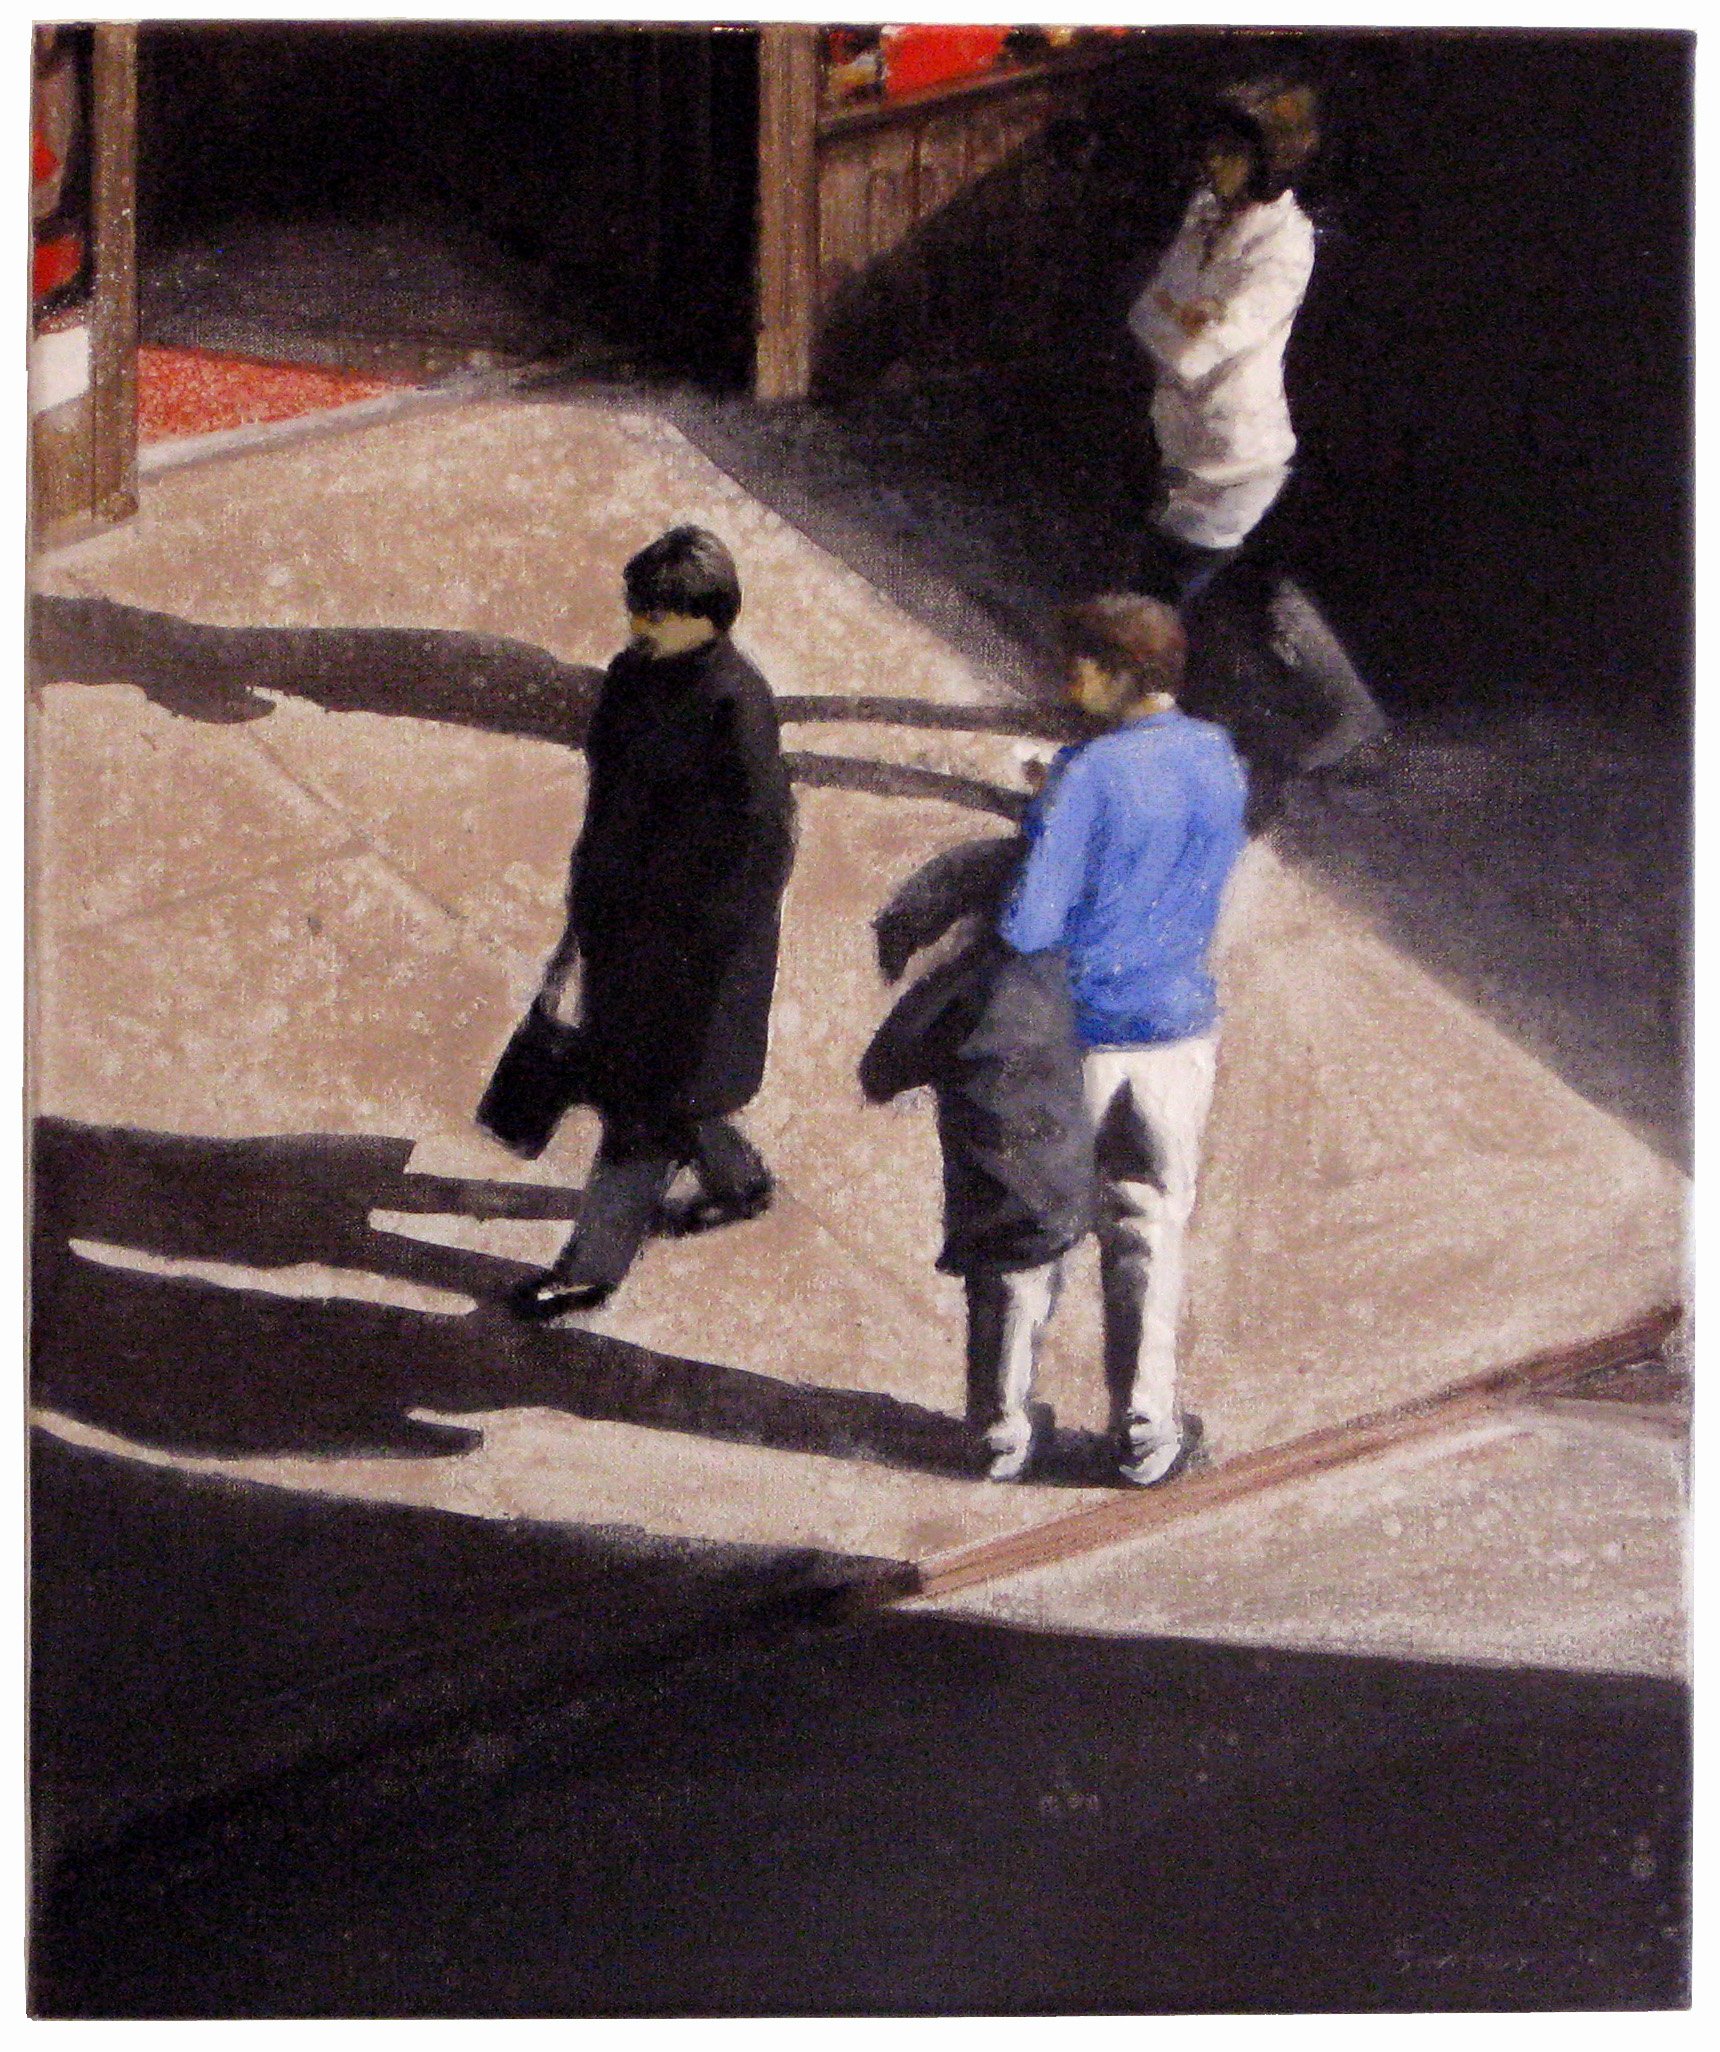  Bowery 8 (study) 24x20 inches (61x51cm) Oil on linen 2010 